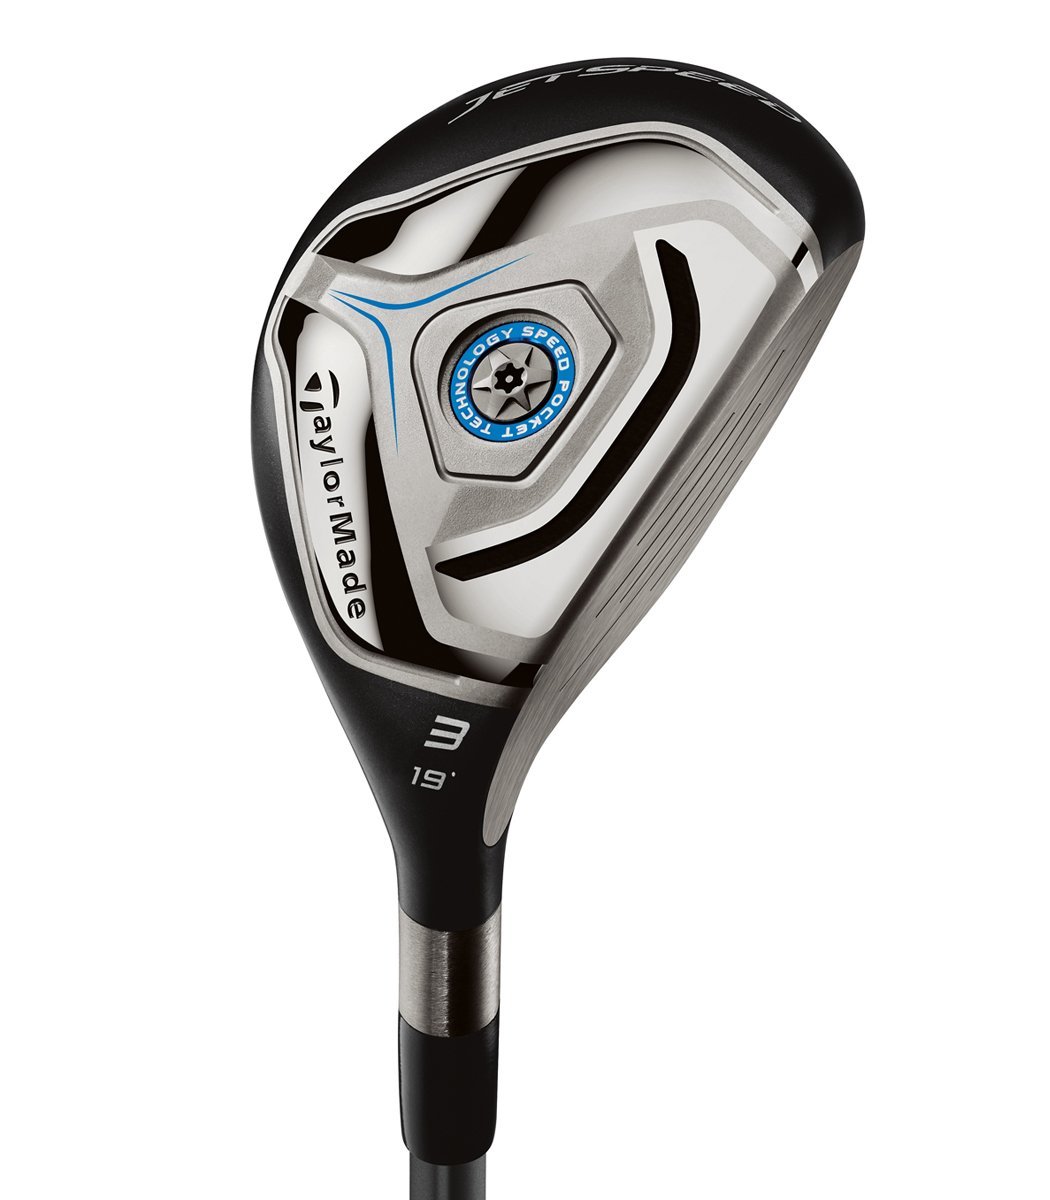 Mens Taylormade Jetspeed Golf Rescue Clubs